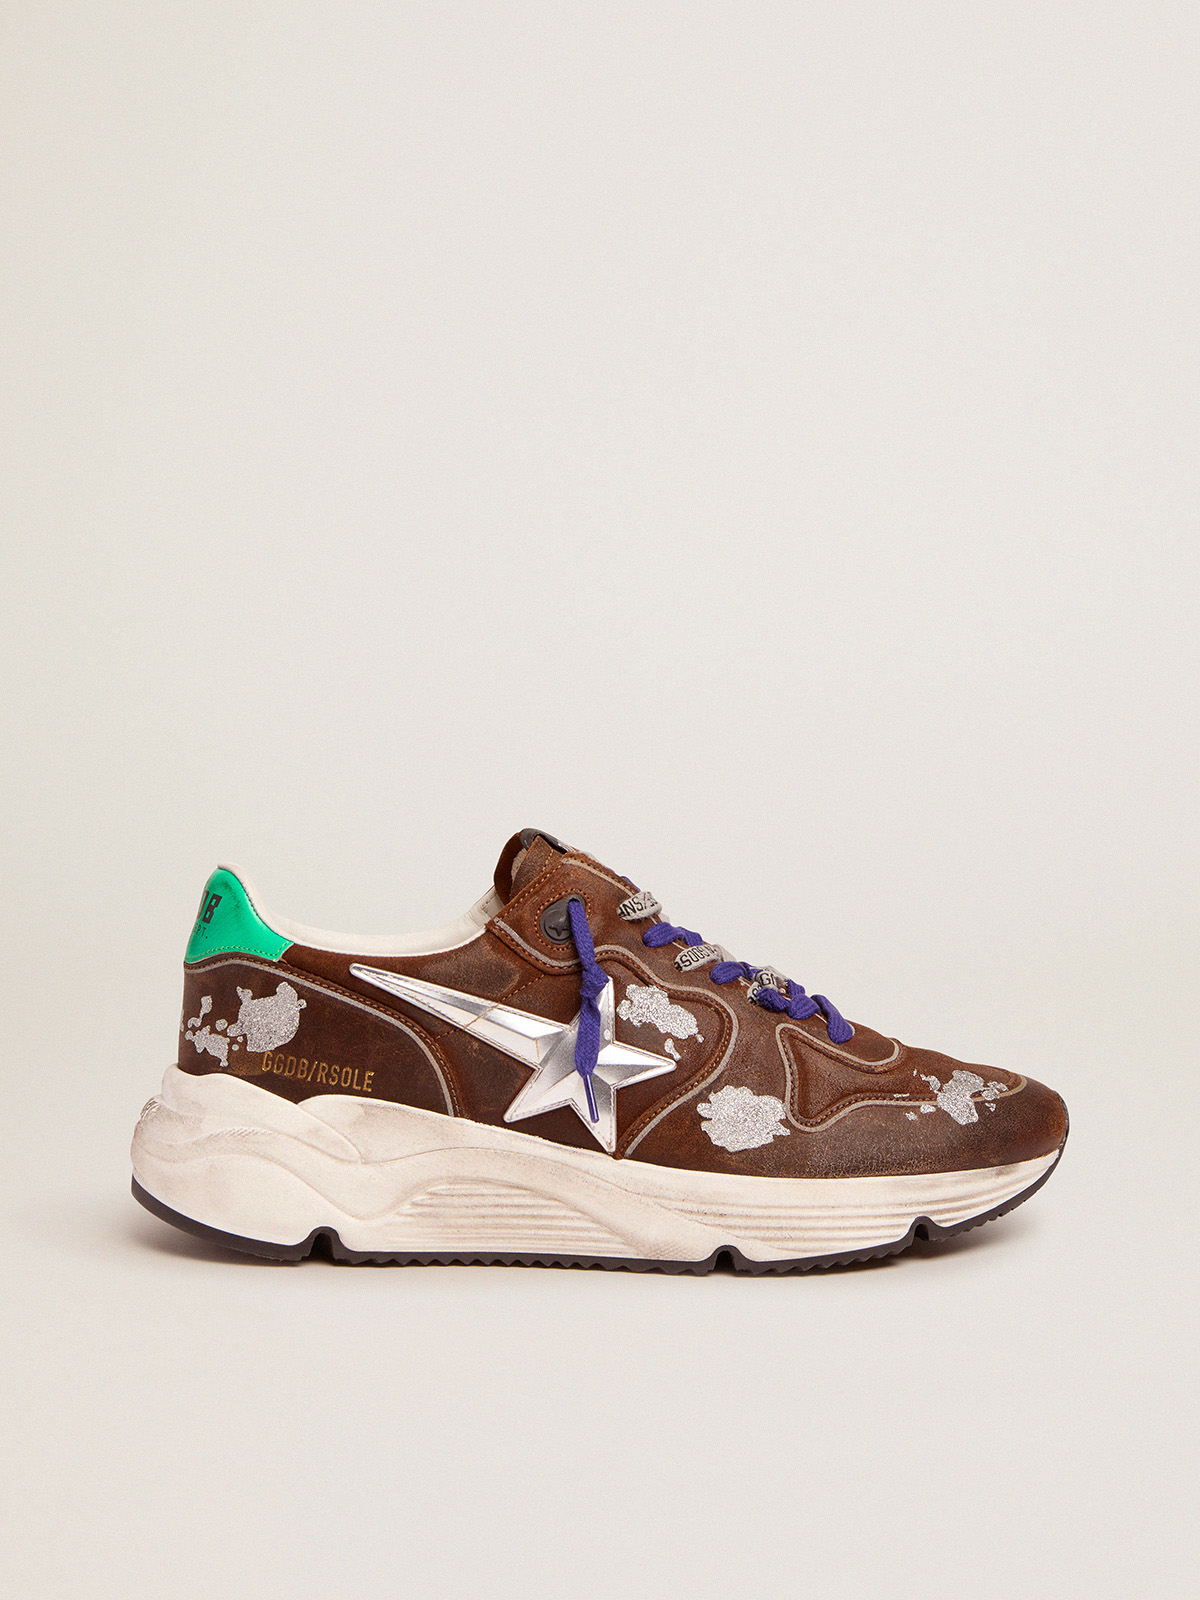 Running Sole sneakers in cognac-colored suede with 3D star | Golden Goose